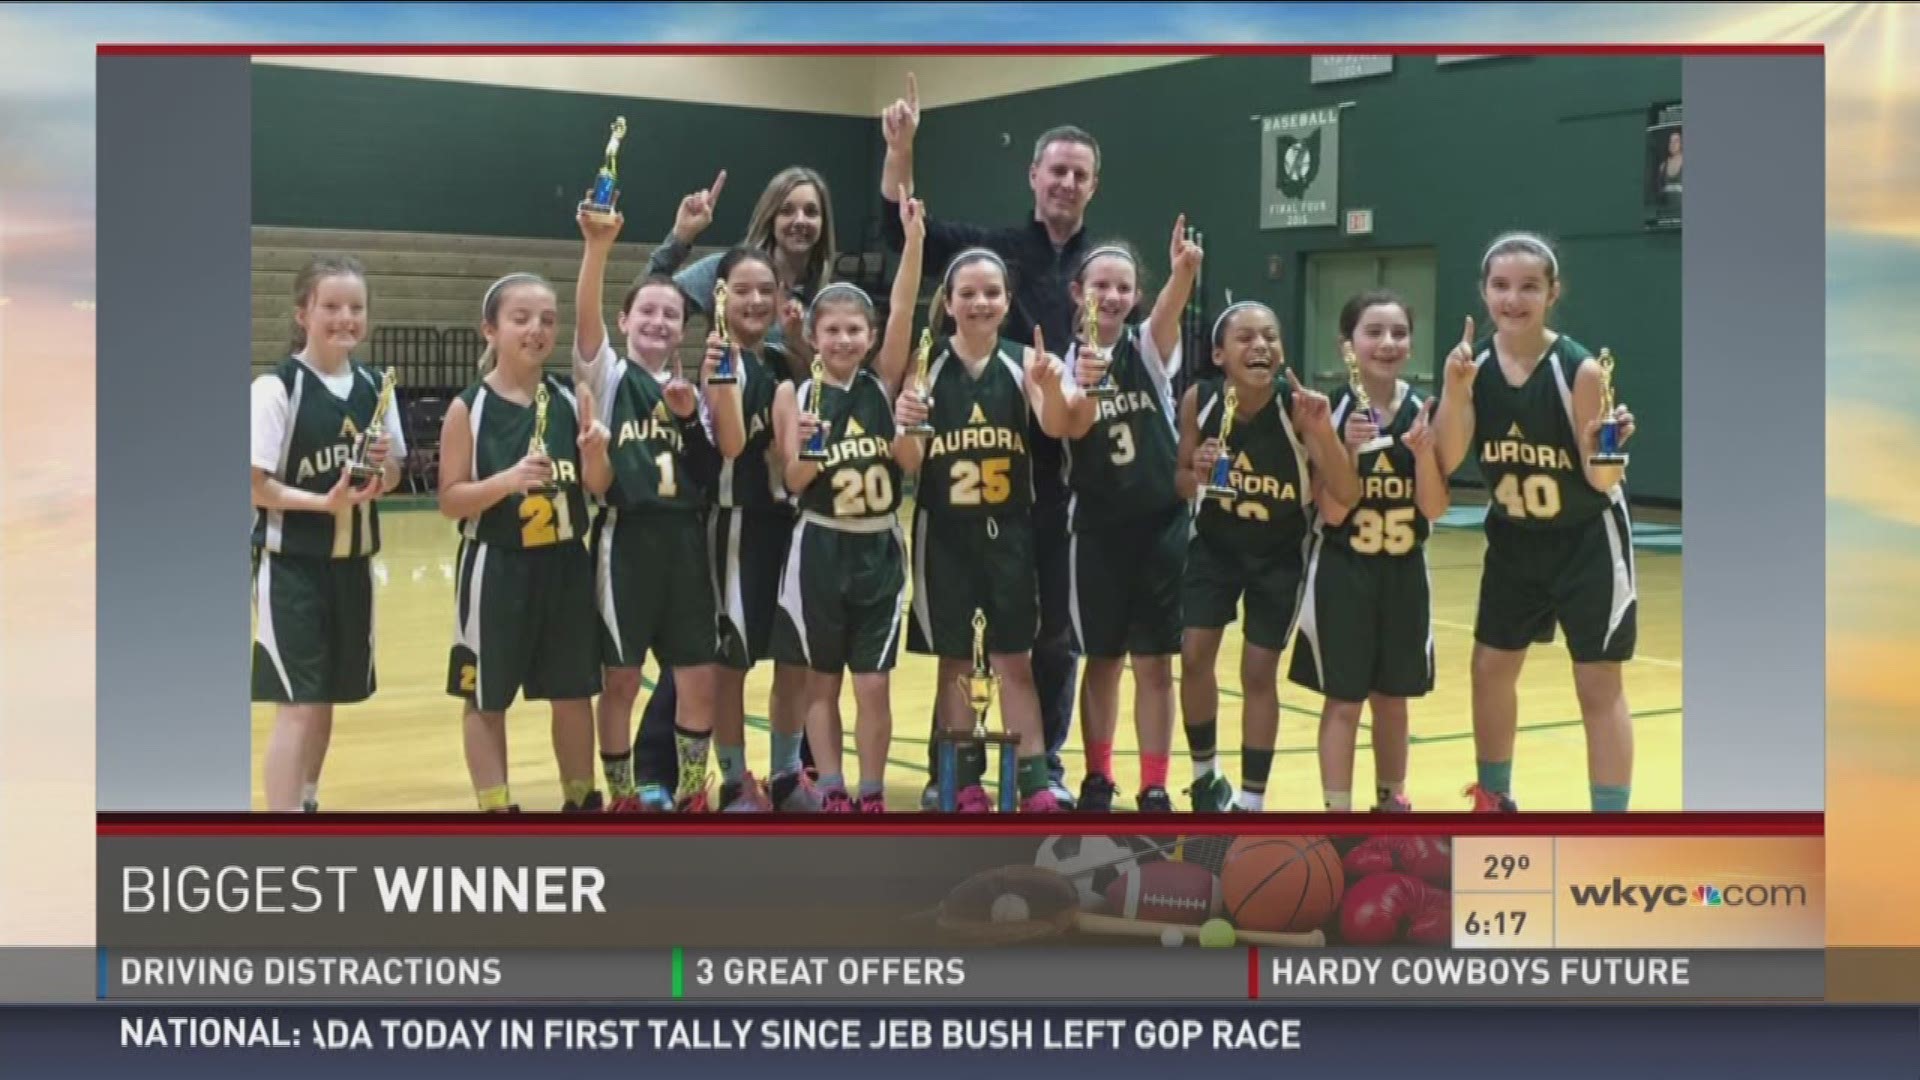 The "biggest winner" in local sports for February 23, 2016 is the Aurora And the 4th Grade Travel Basketball Team.